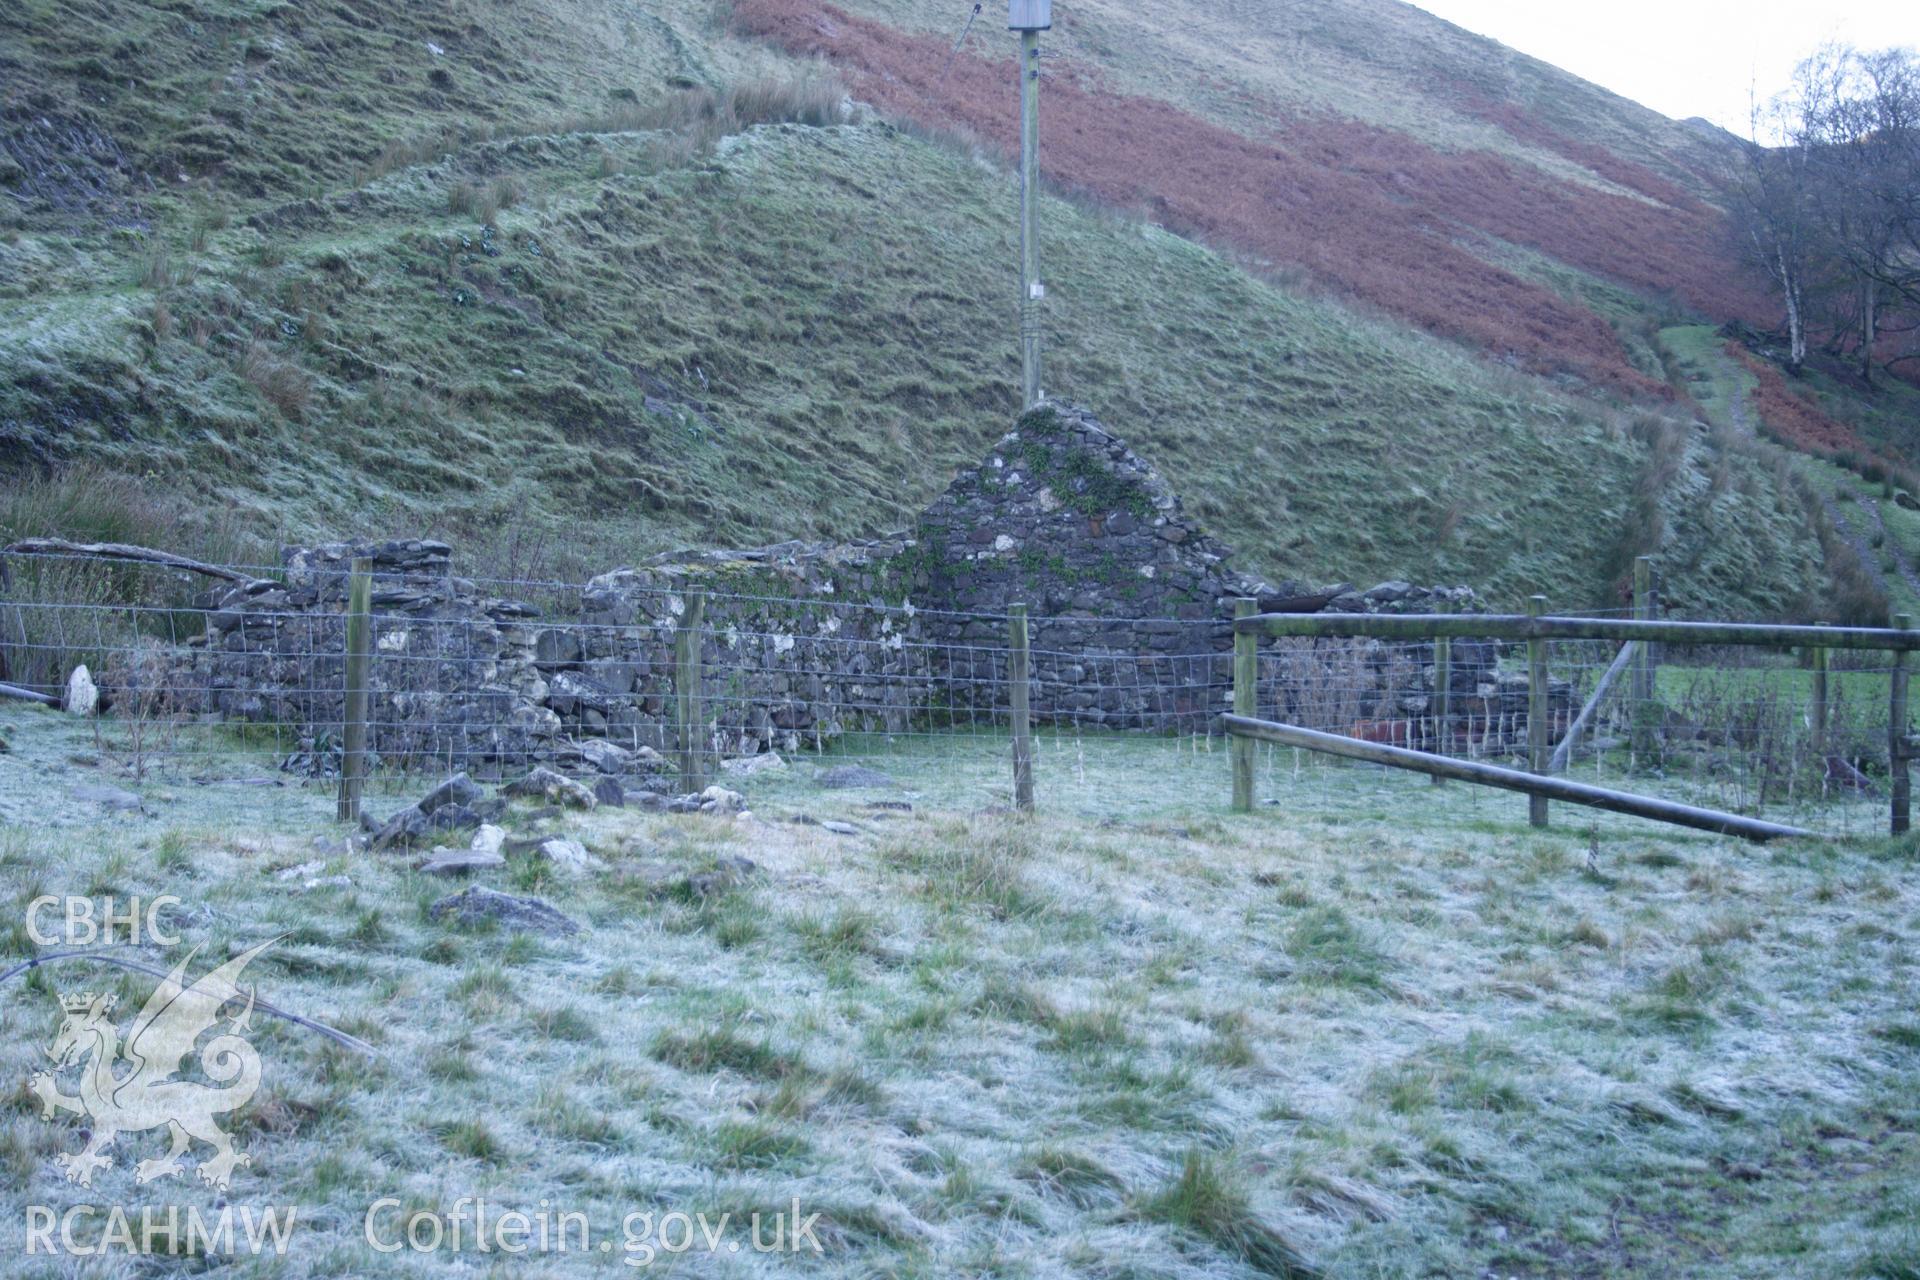 Digital colour photograph of a building at Ystrad Ffin taken on 03/03/2008 by D.E. Schlee during the Llyn Brianne Upland Survey undertaken by Dyfed Archaeological Trust.